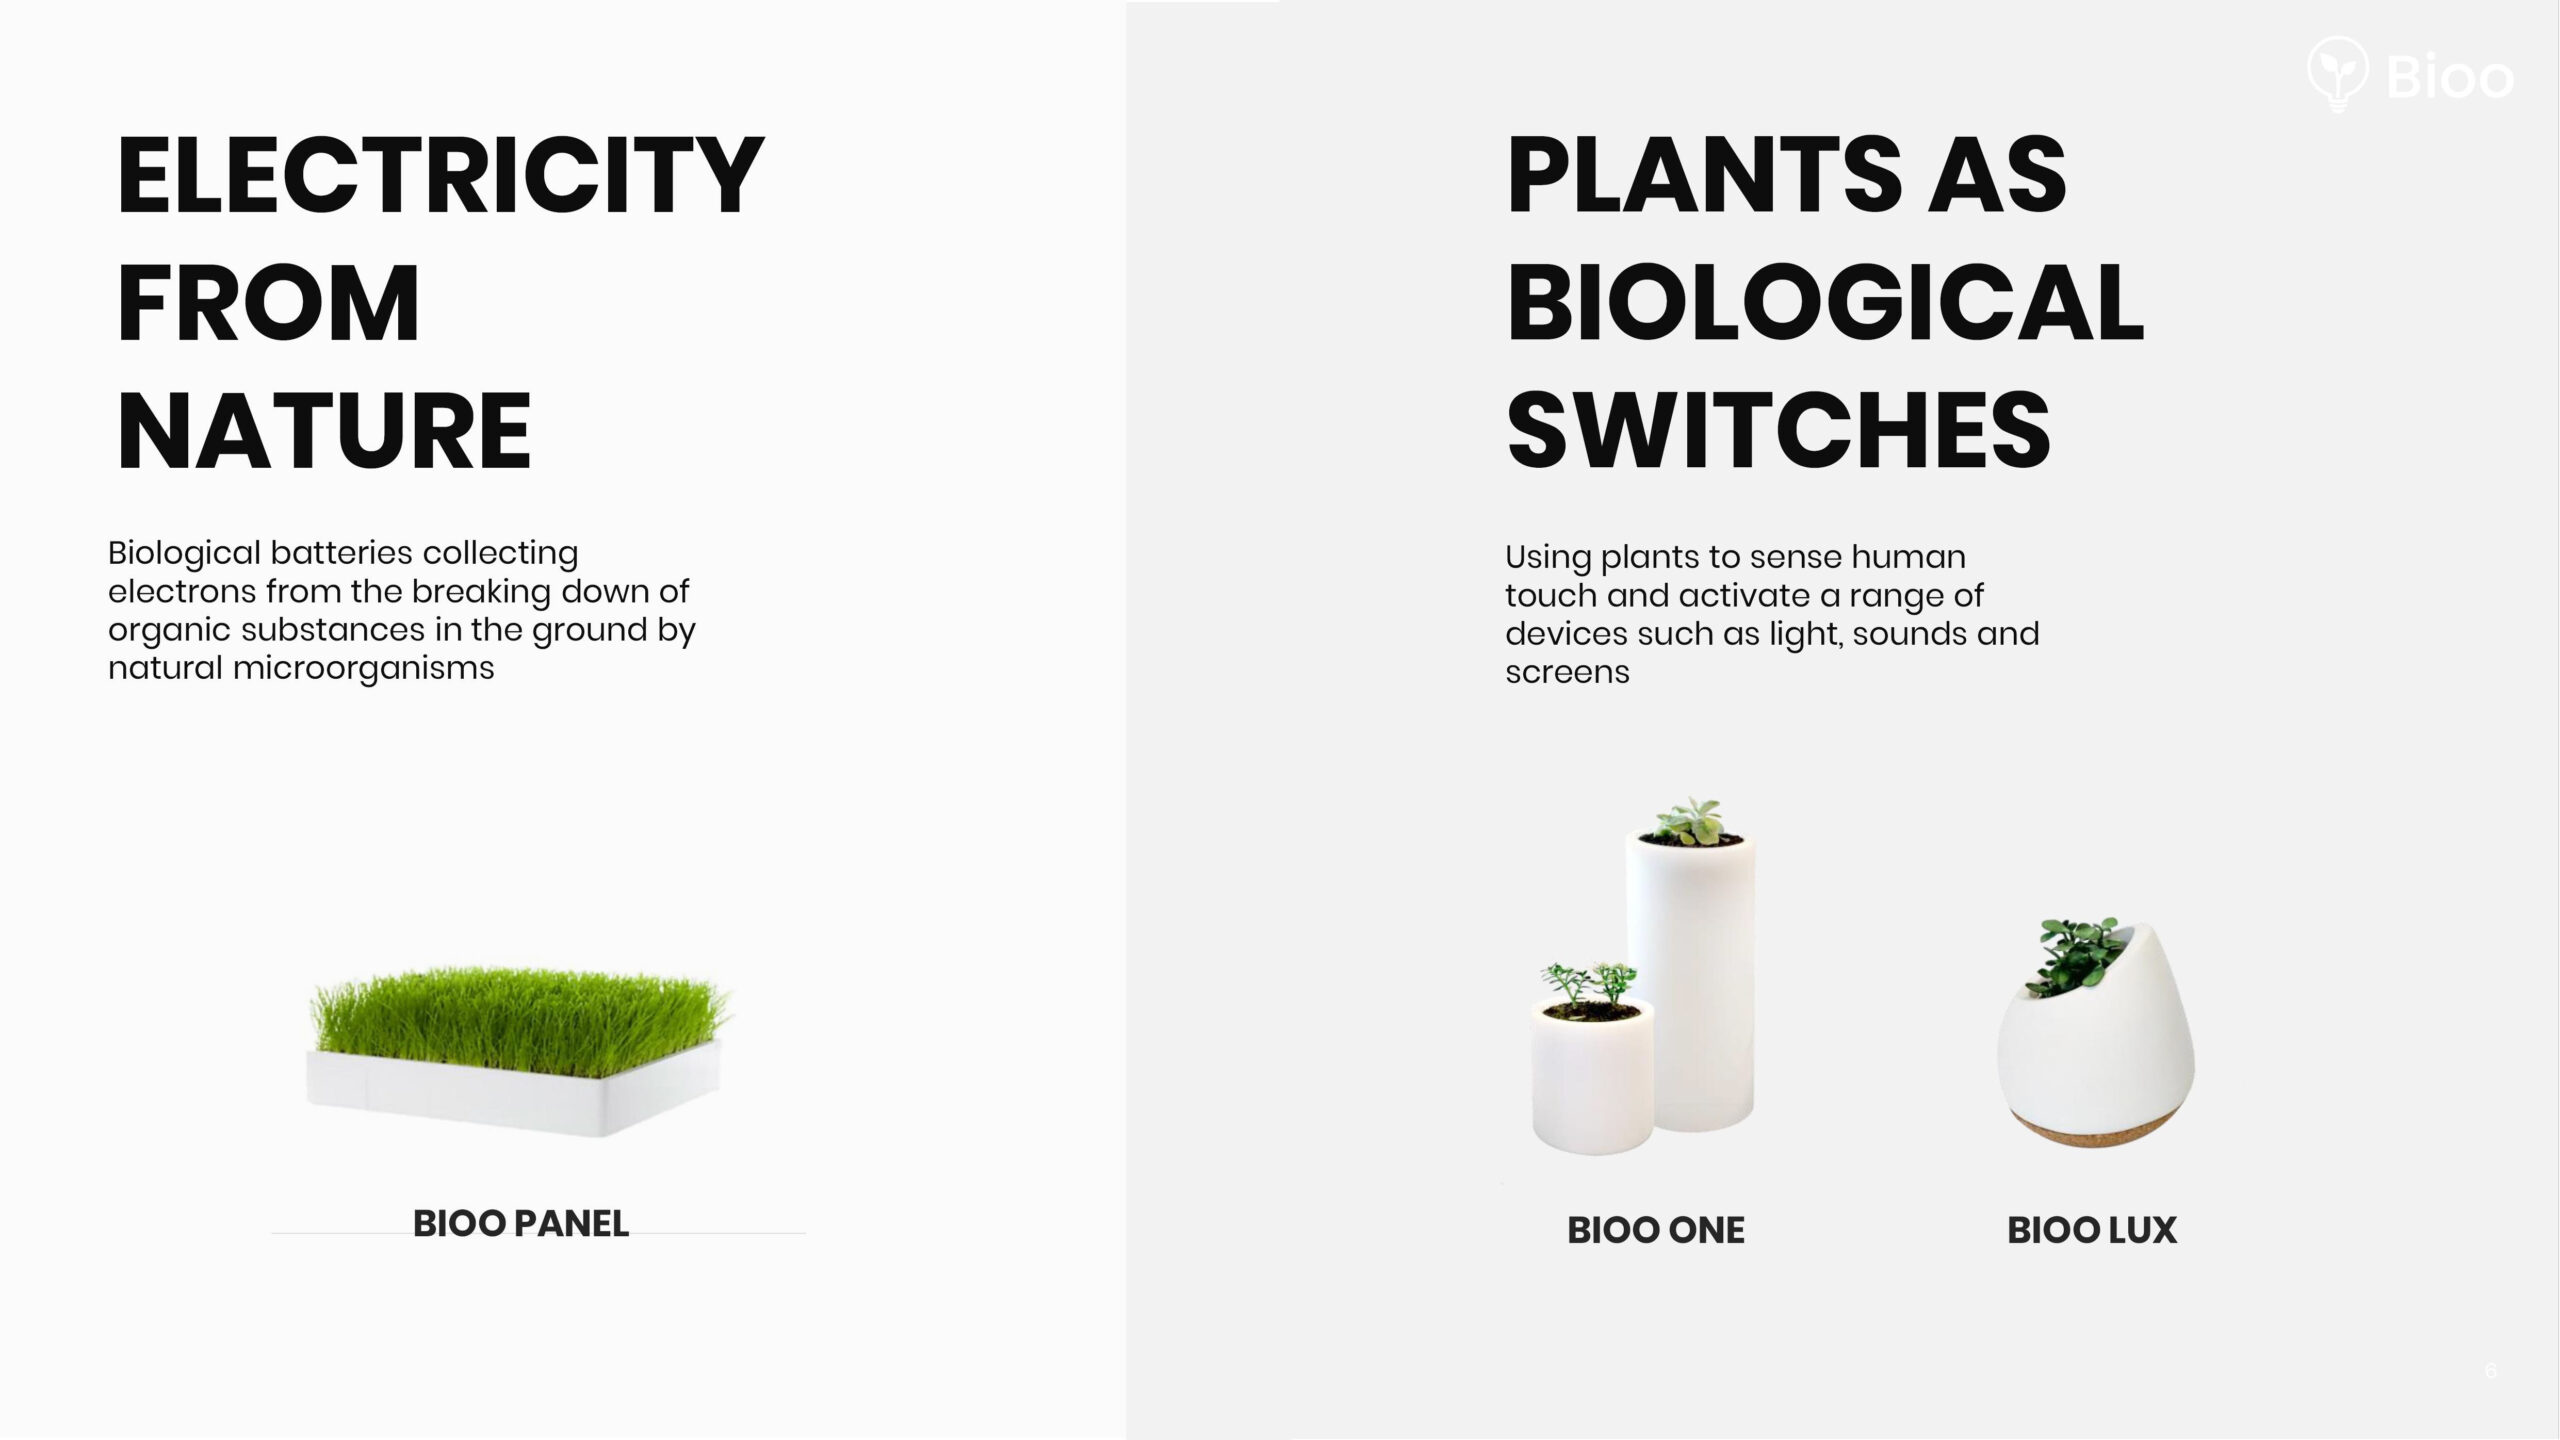 Biotech City's ambitious sustainable vision is made possible through collaboration with BIOO, a leading biotechnology company at the convergence of nature